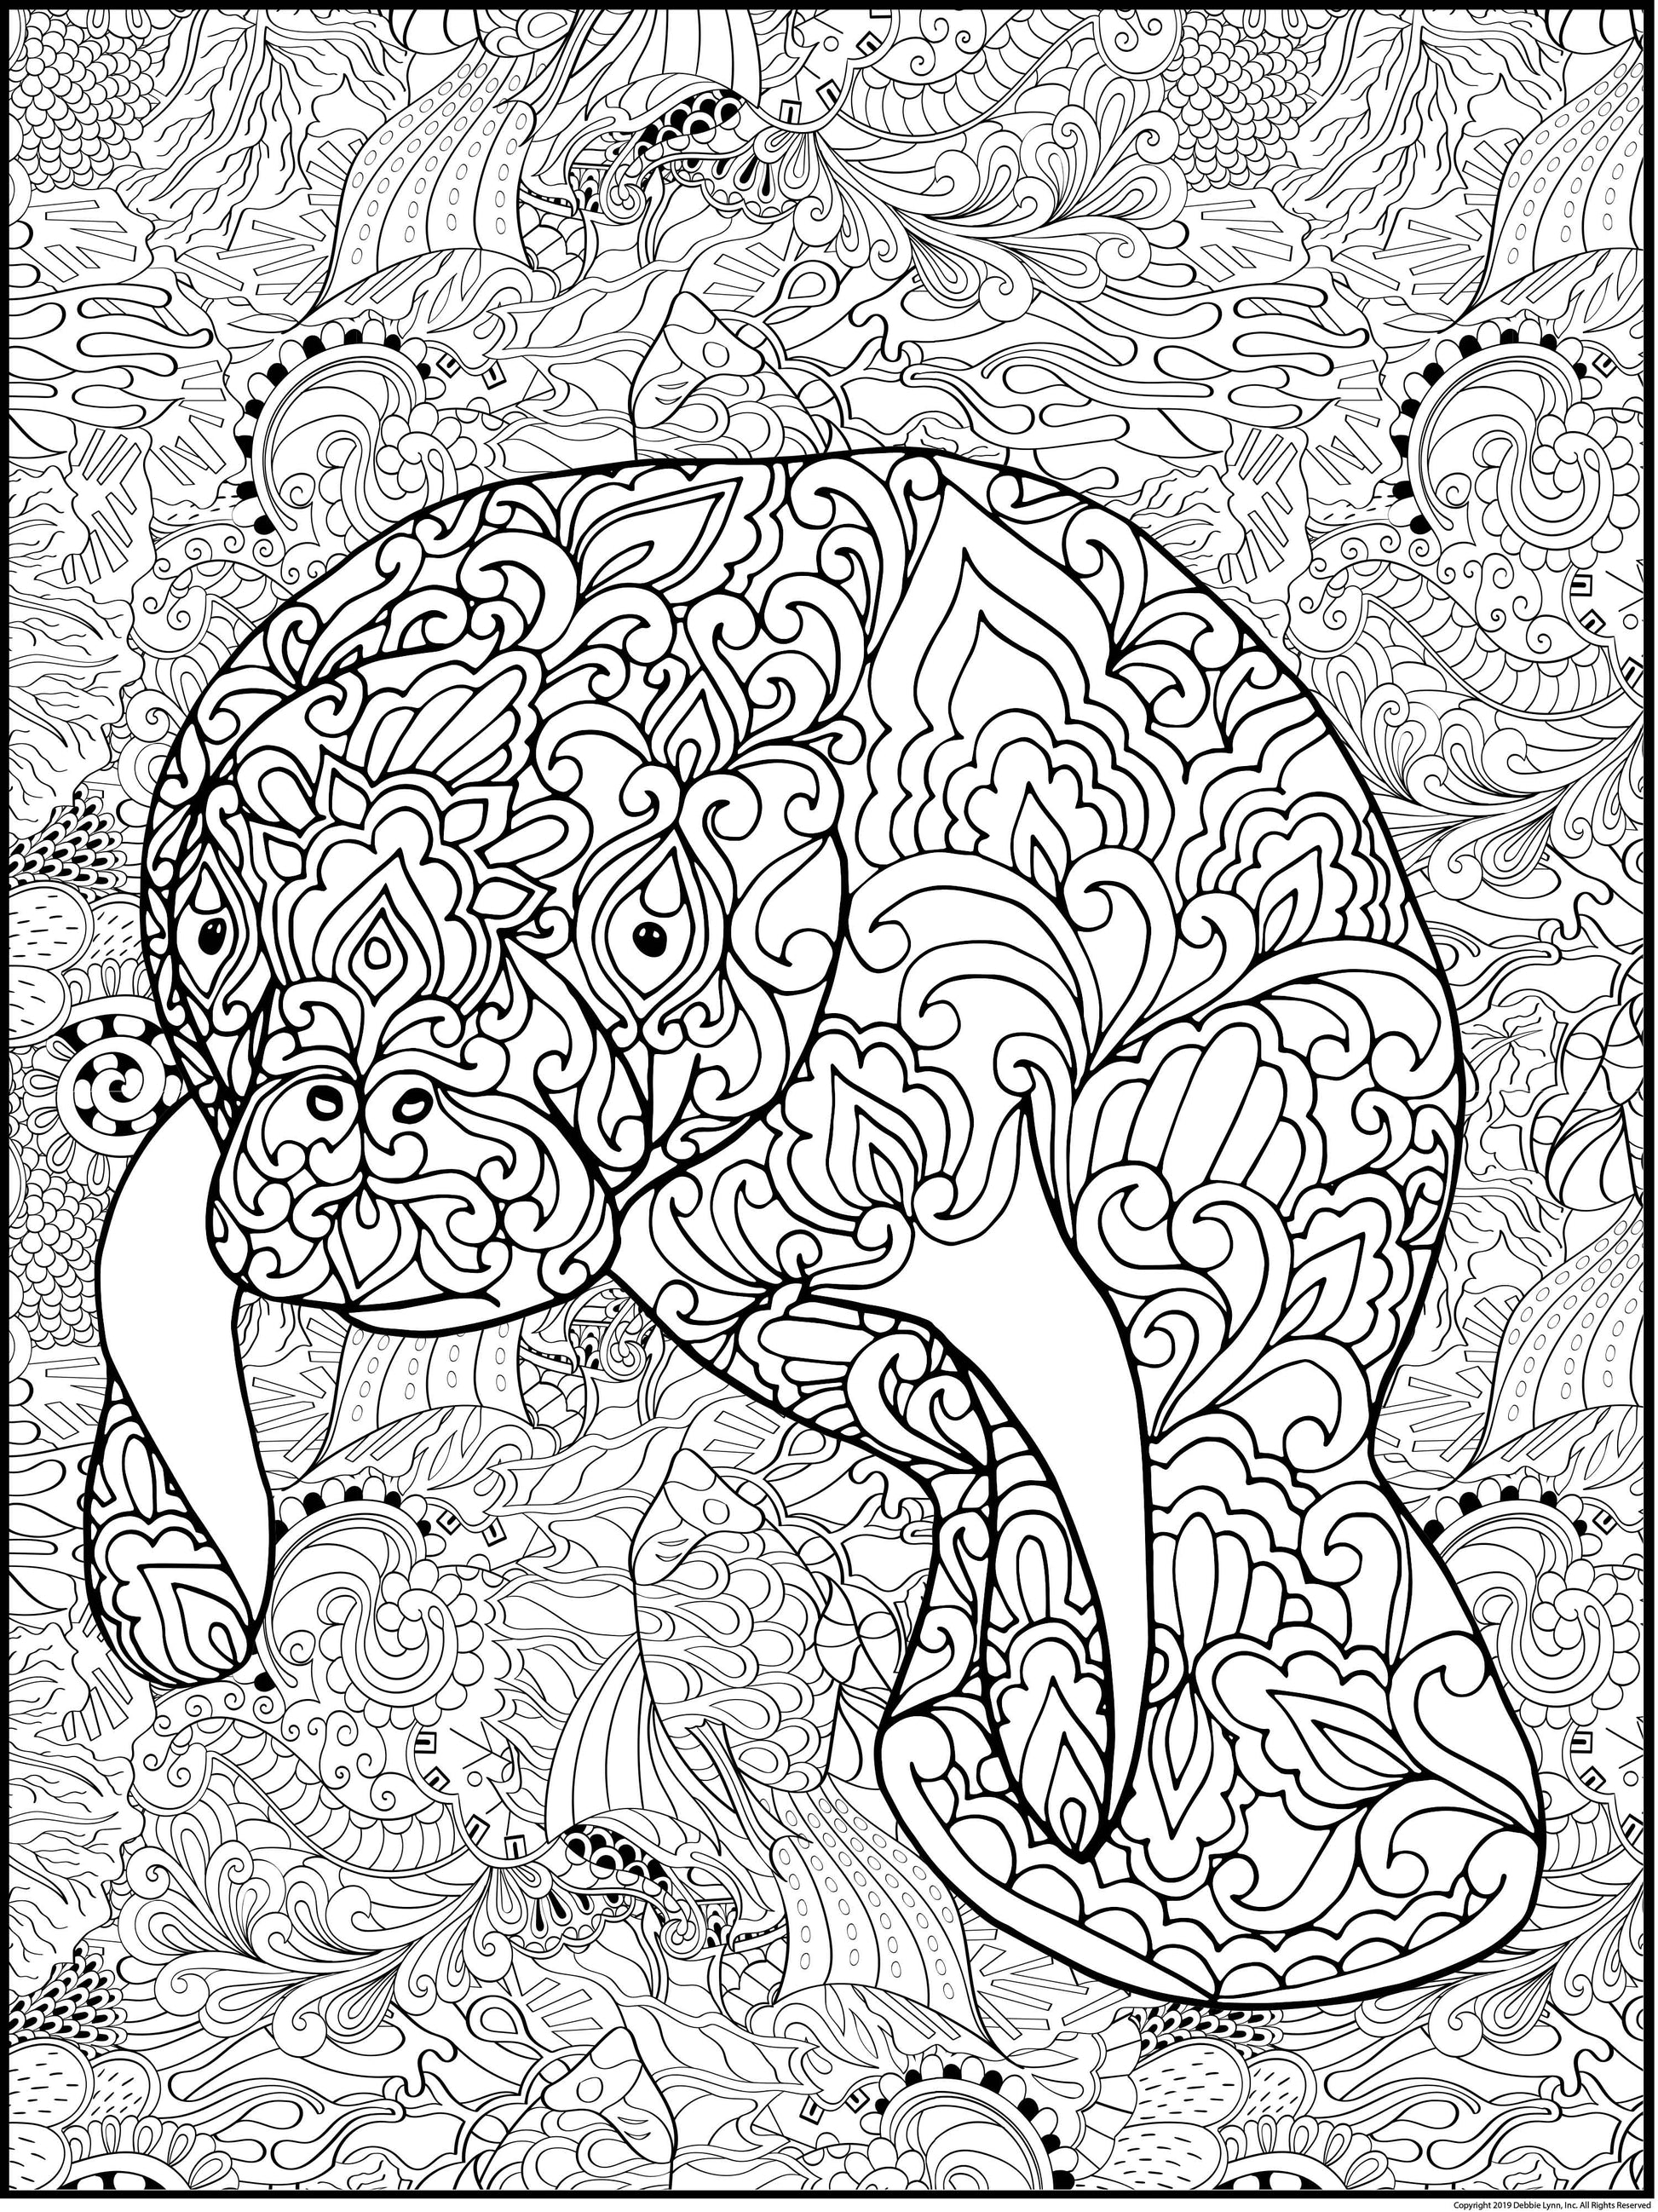 Manatee personalized giant coloring poster x â debbie lynn